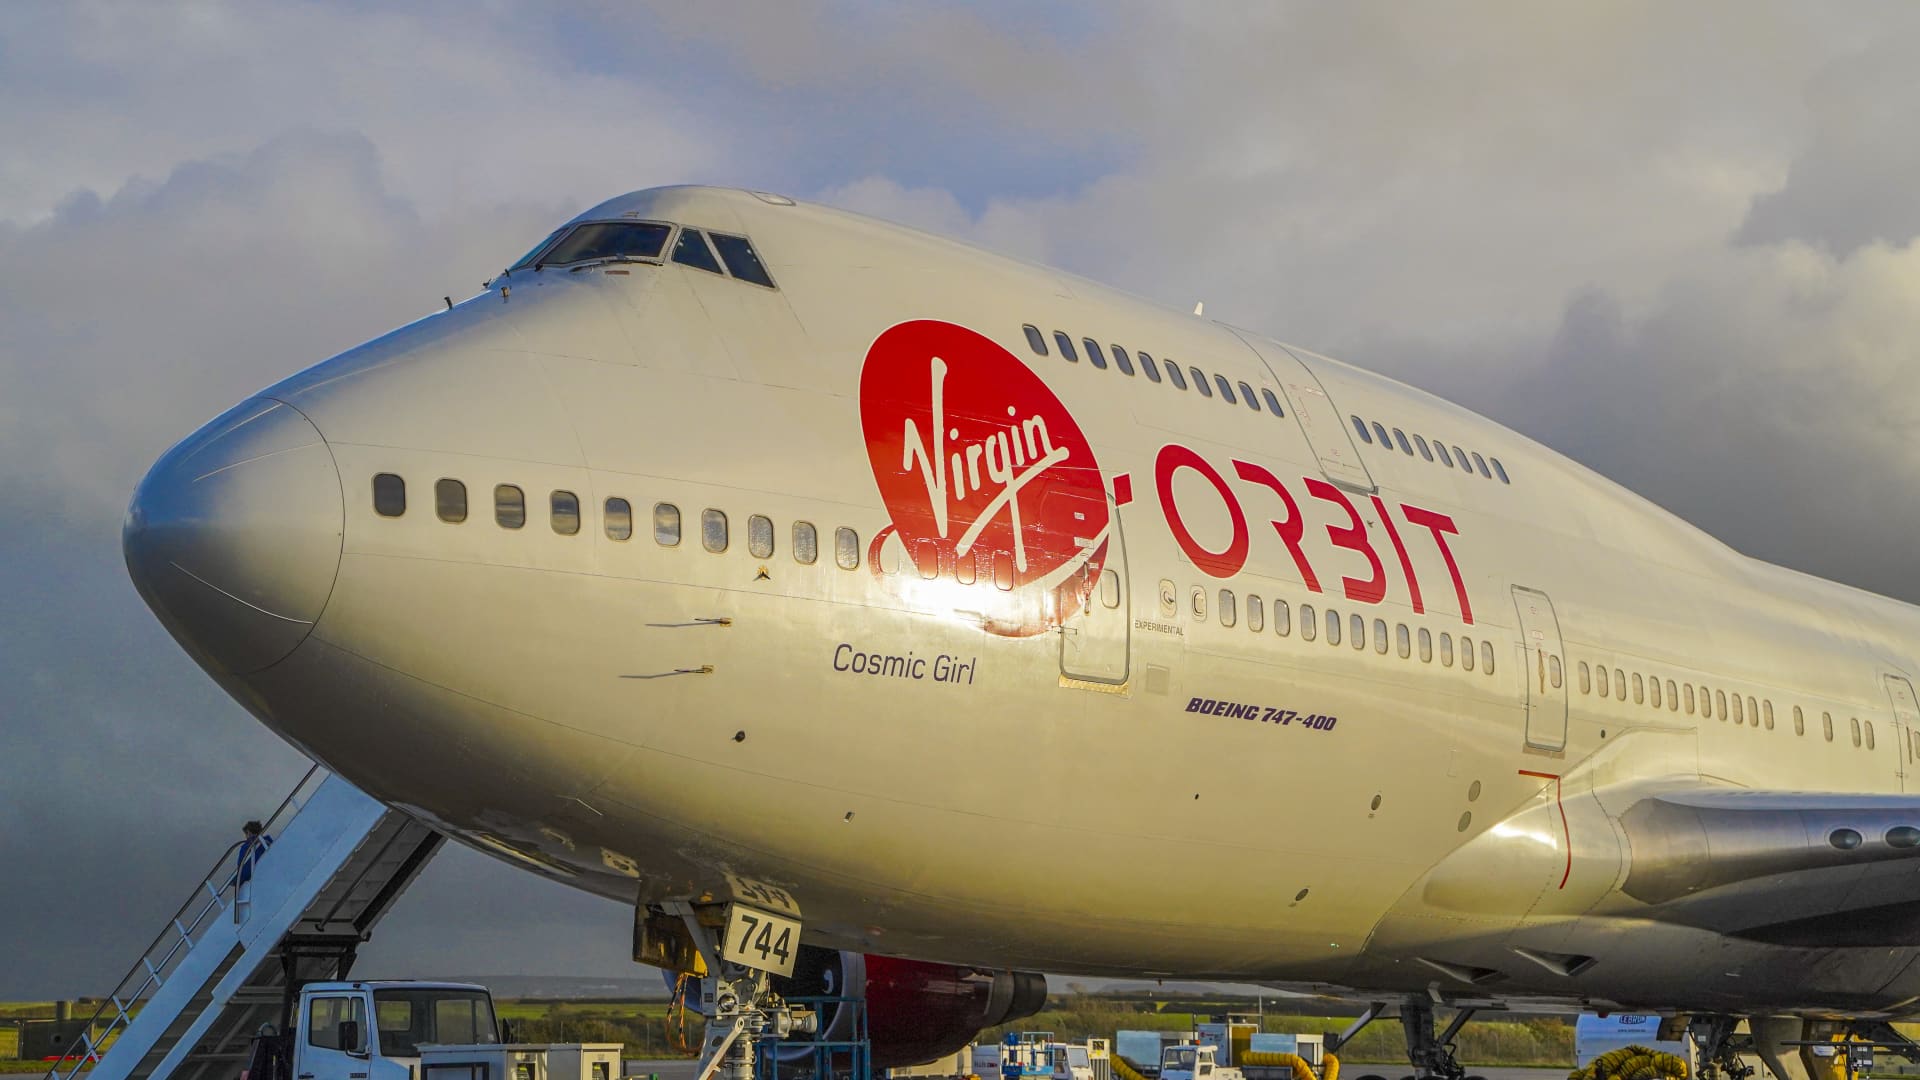 Virgin Orbit sells assets in bankruptcy auction to Rocket Lab, Stratolaunch and Vast’s Launcher